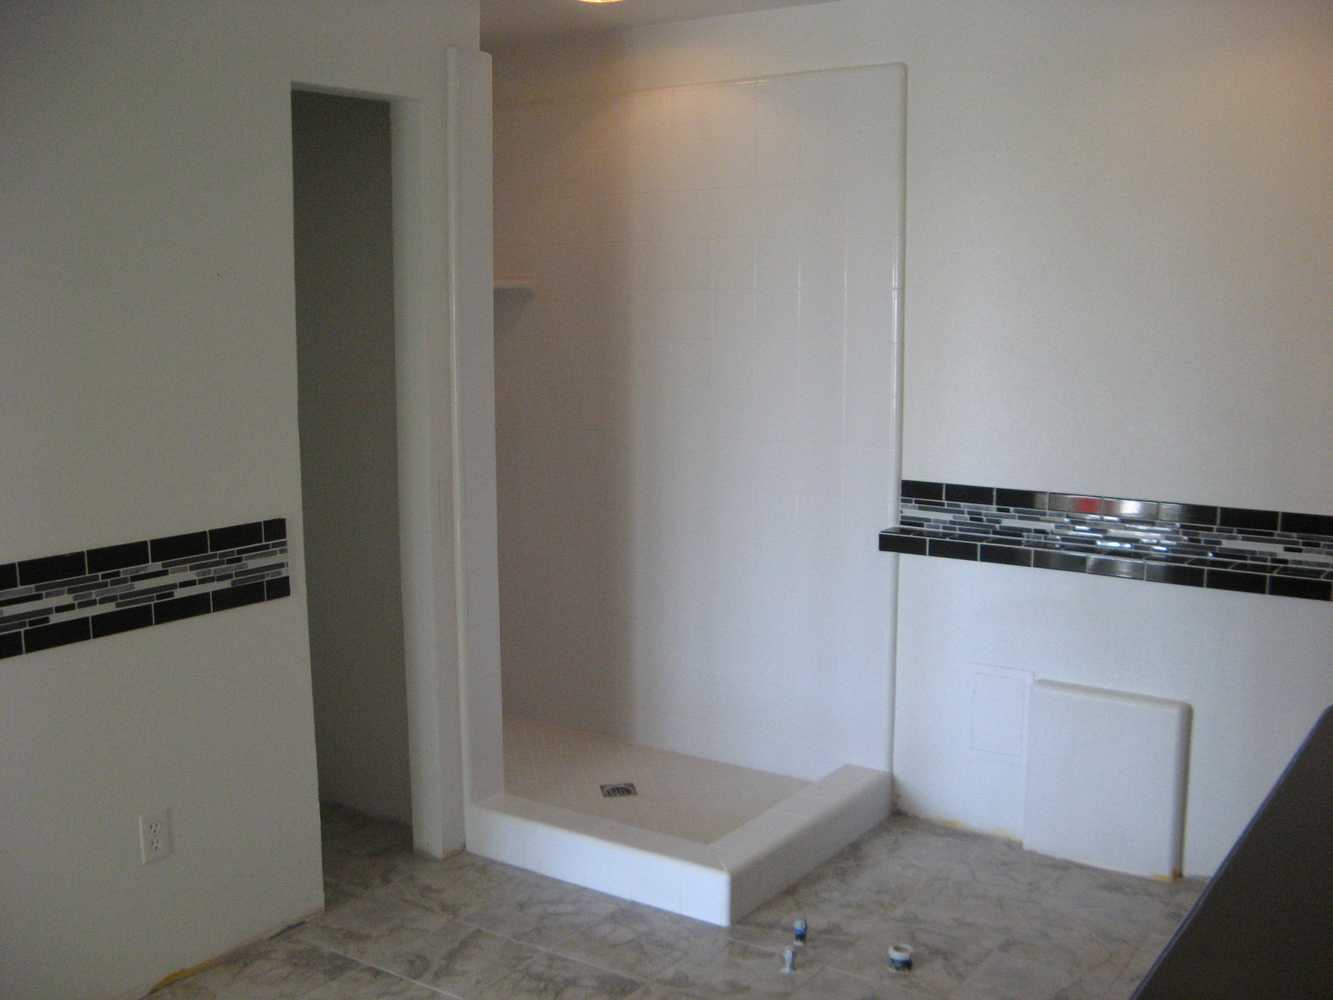 Photo(s) from Banton Tile